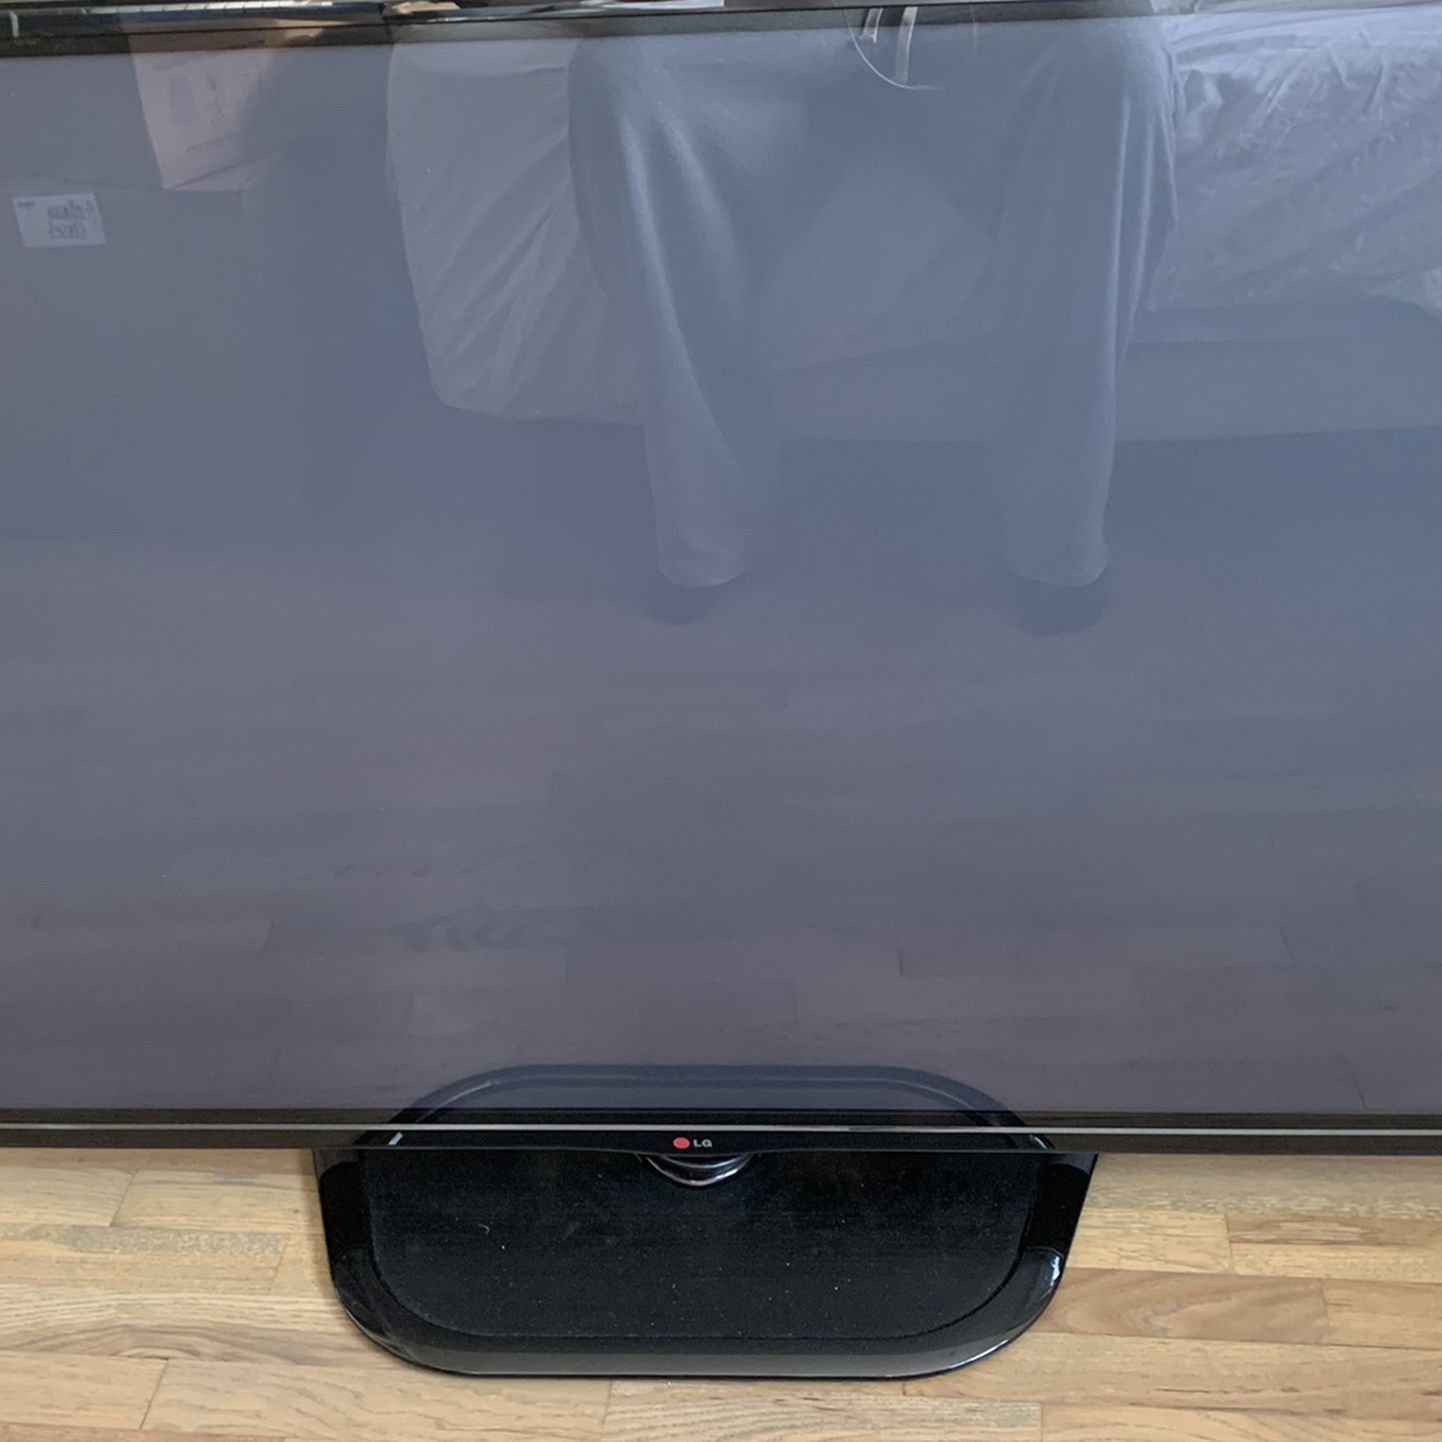 LG 60 Inch Plasma With Remote Good Condition